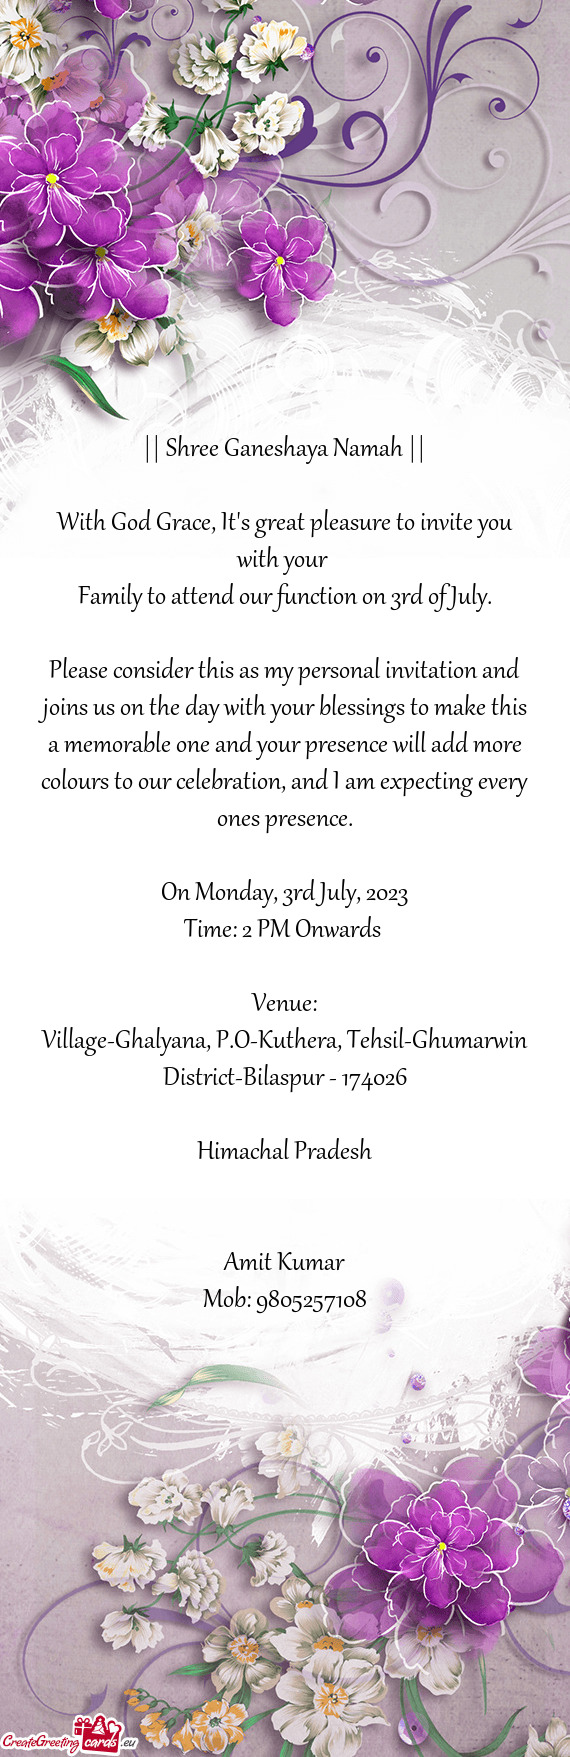 Family to attend our function on 3rd of July